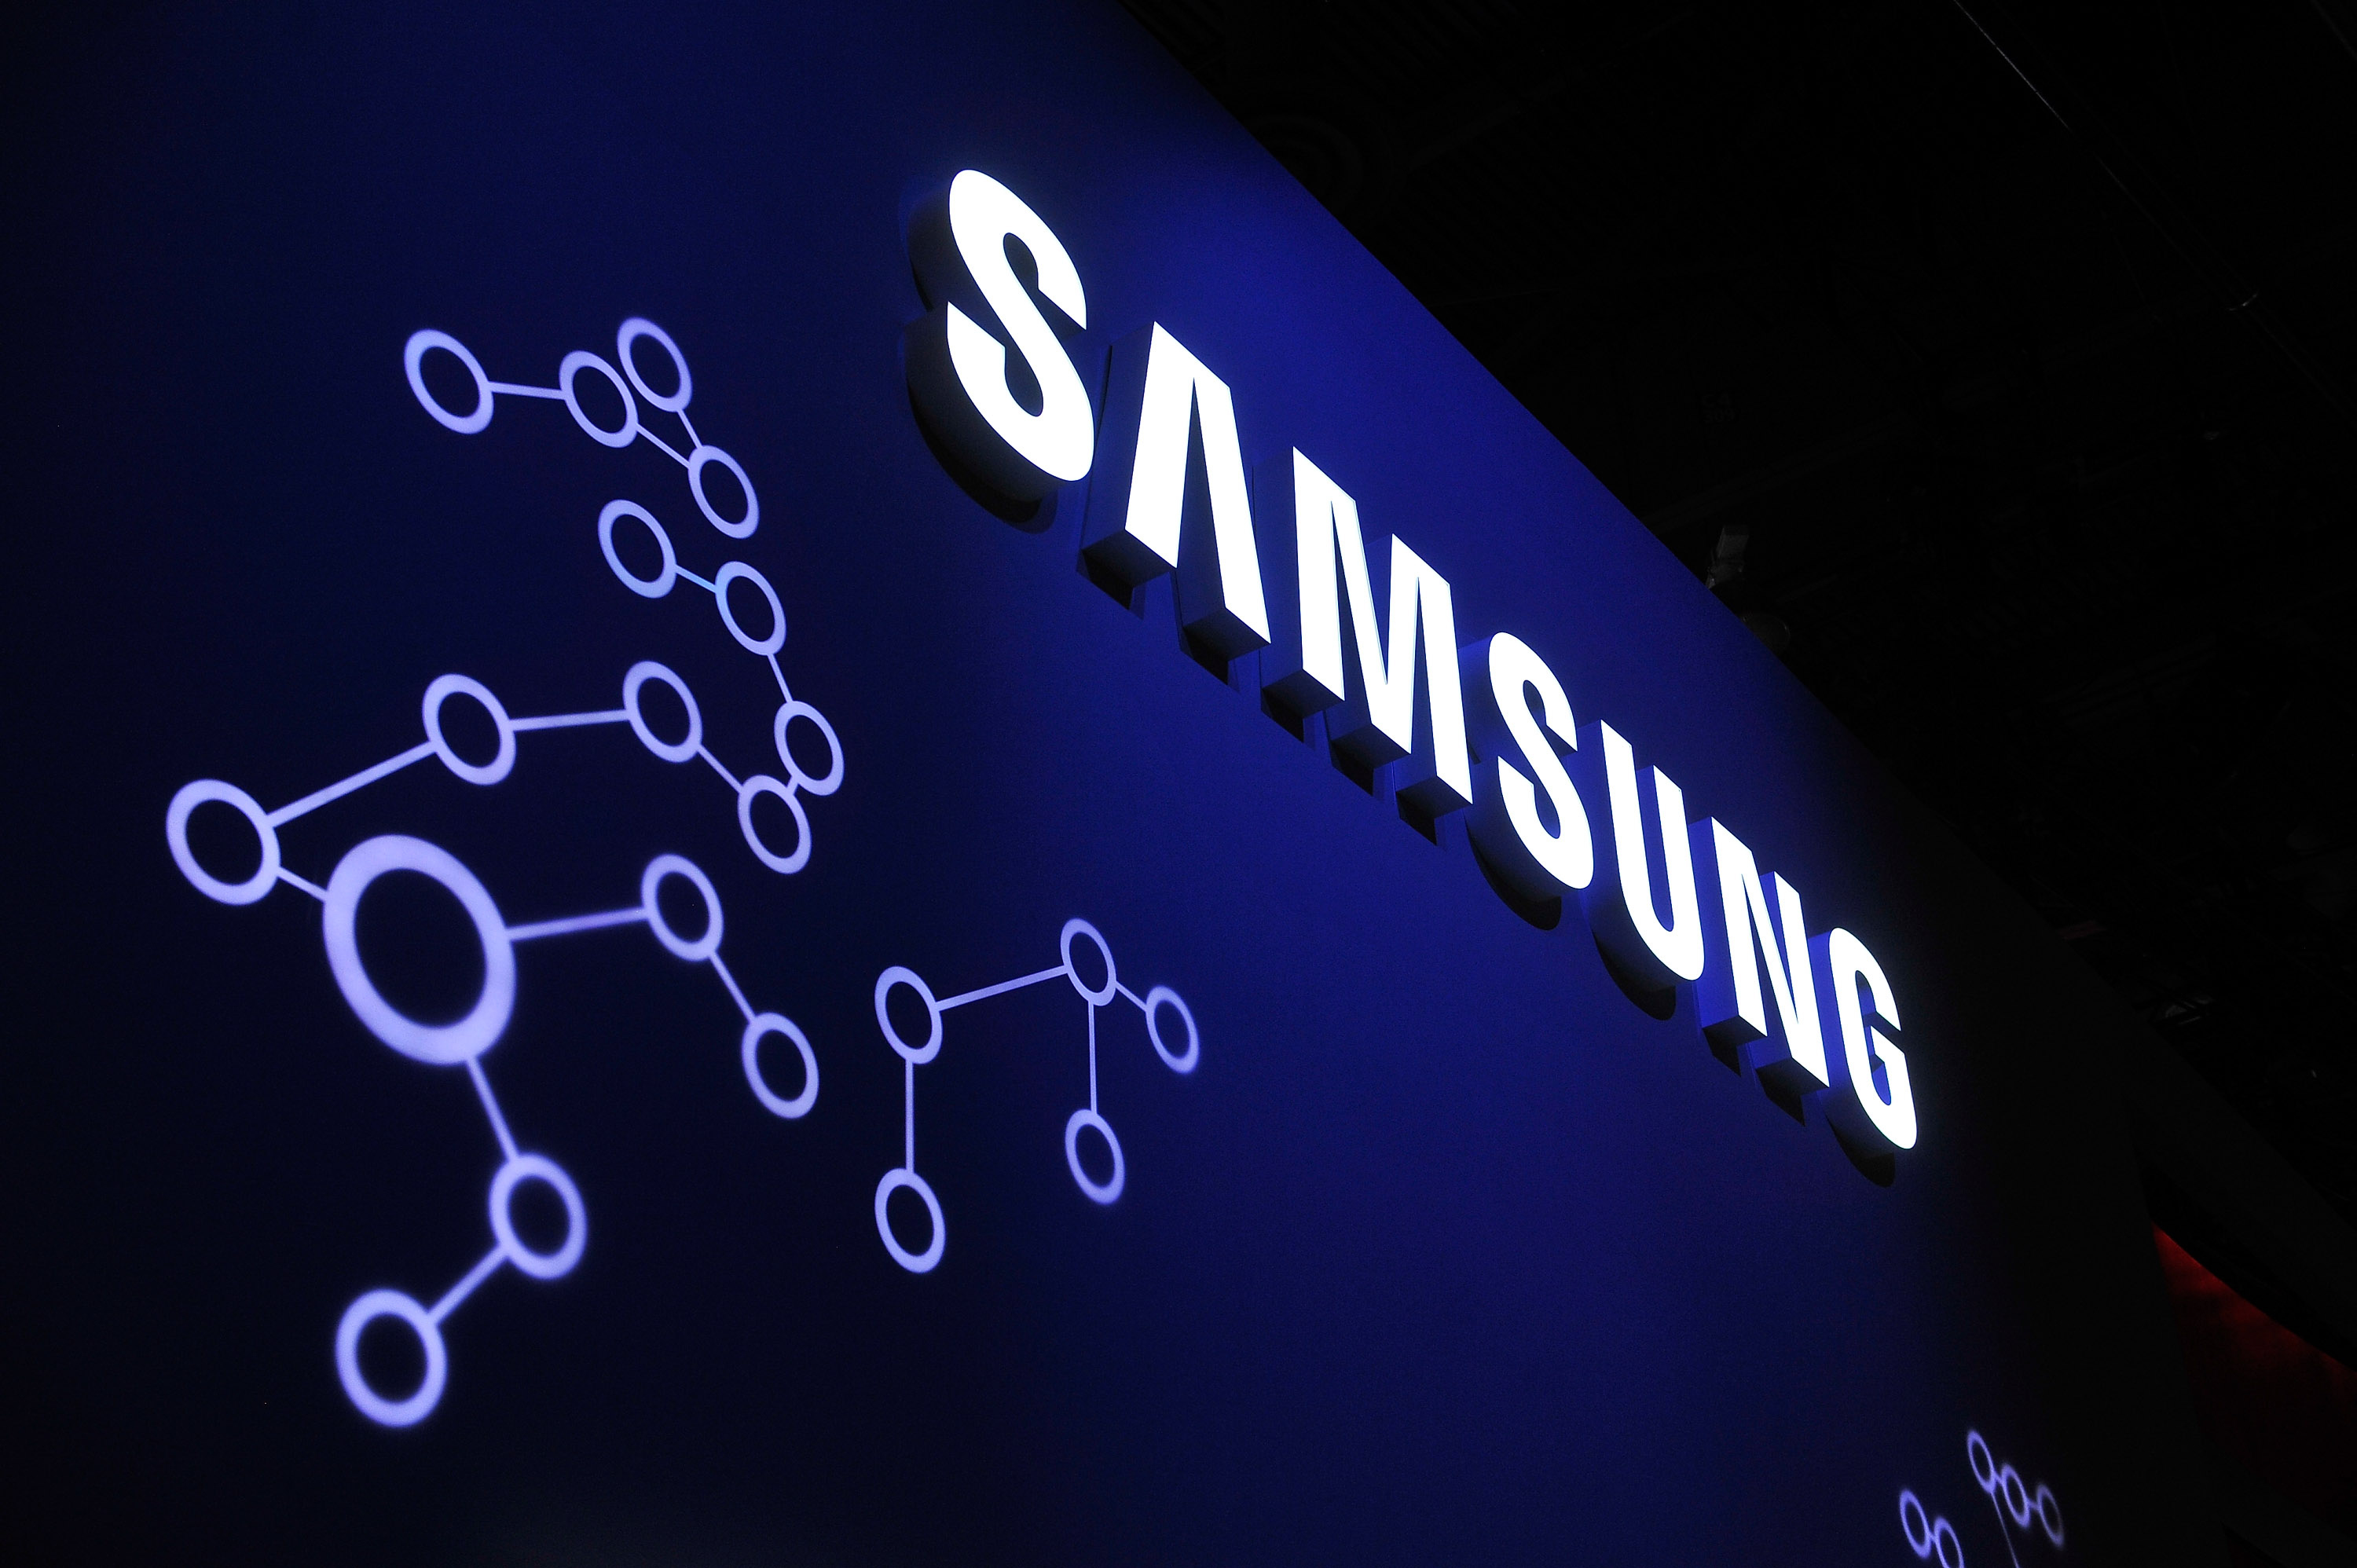 A general view of the Samsung booth at the 2015 International CES at the Las Vegas Convention Center on January 6, 2015 in Las Vegas, Nevada. (David Becker&mdash;Getty Images)